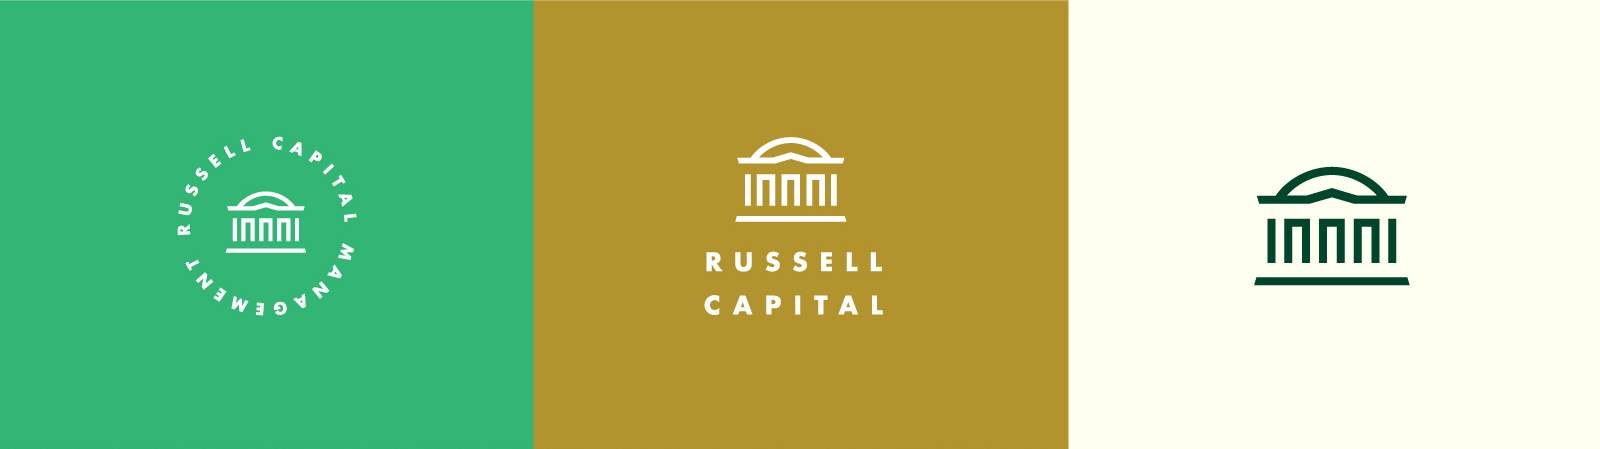 A Brand Identity for Russell Capital by Bullhorn Creative